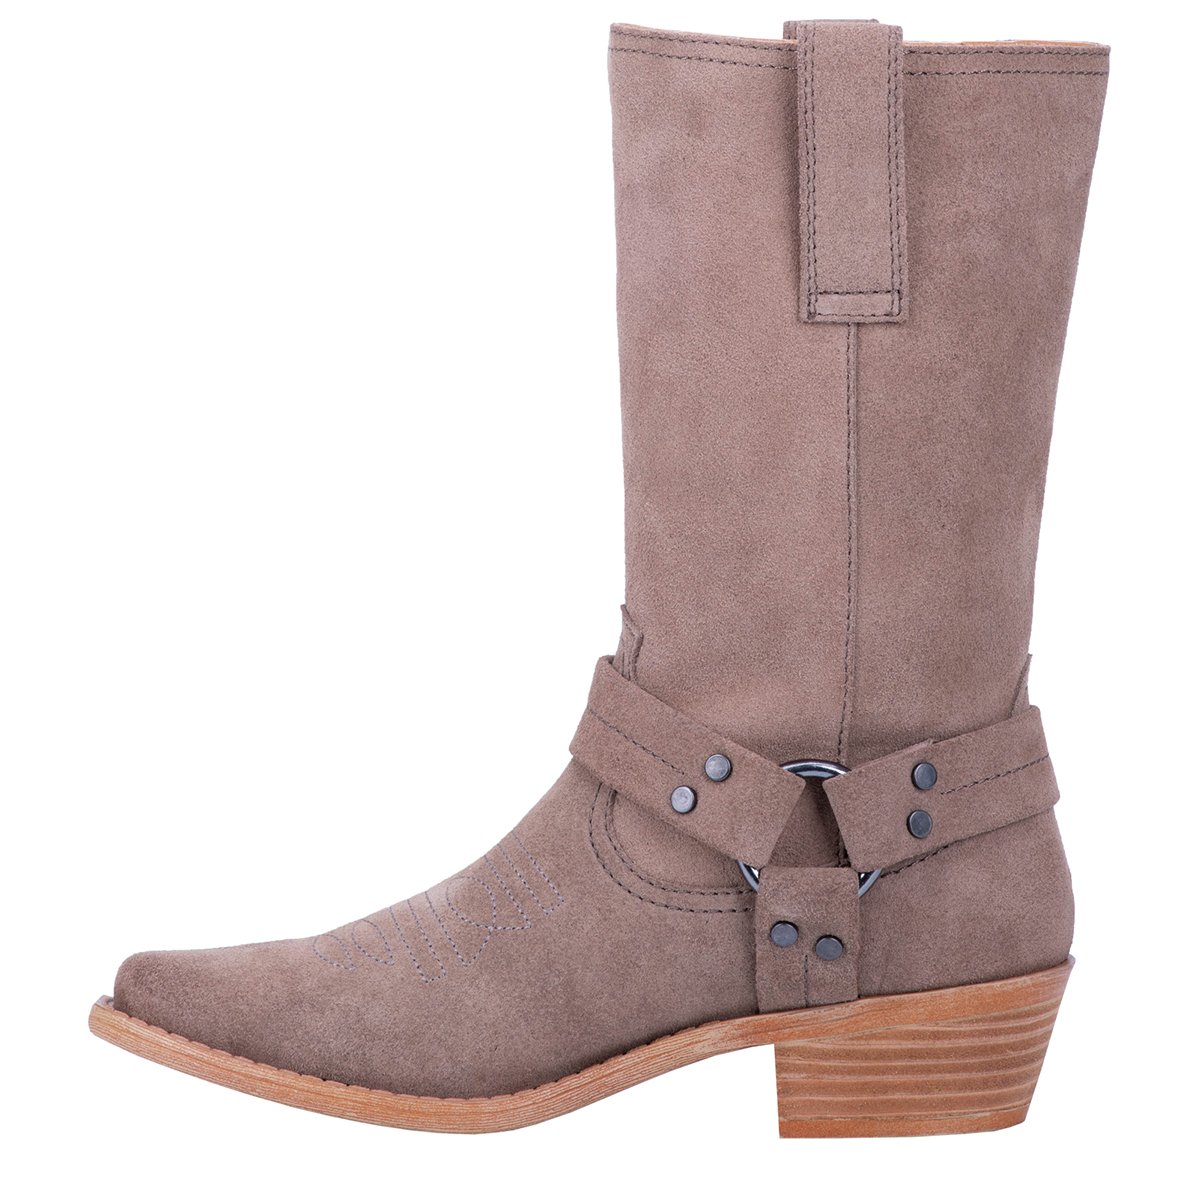 Dingo Taupe Suede - The Boot Life, LLC